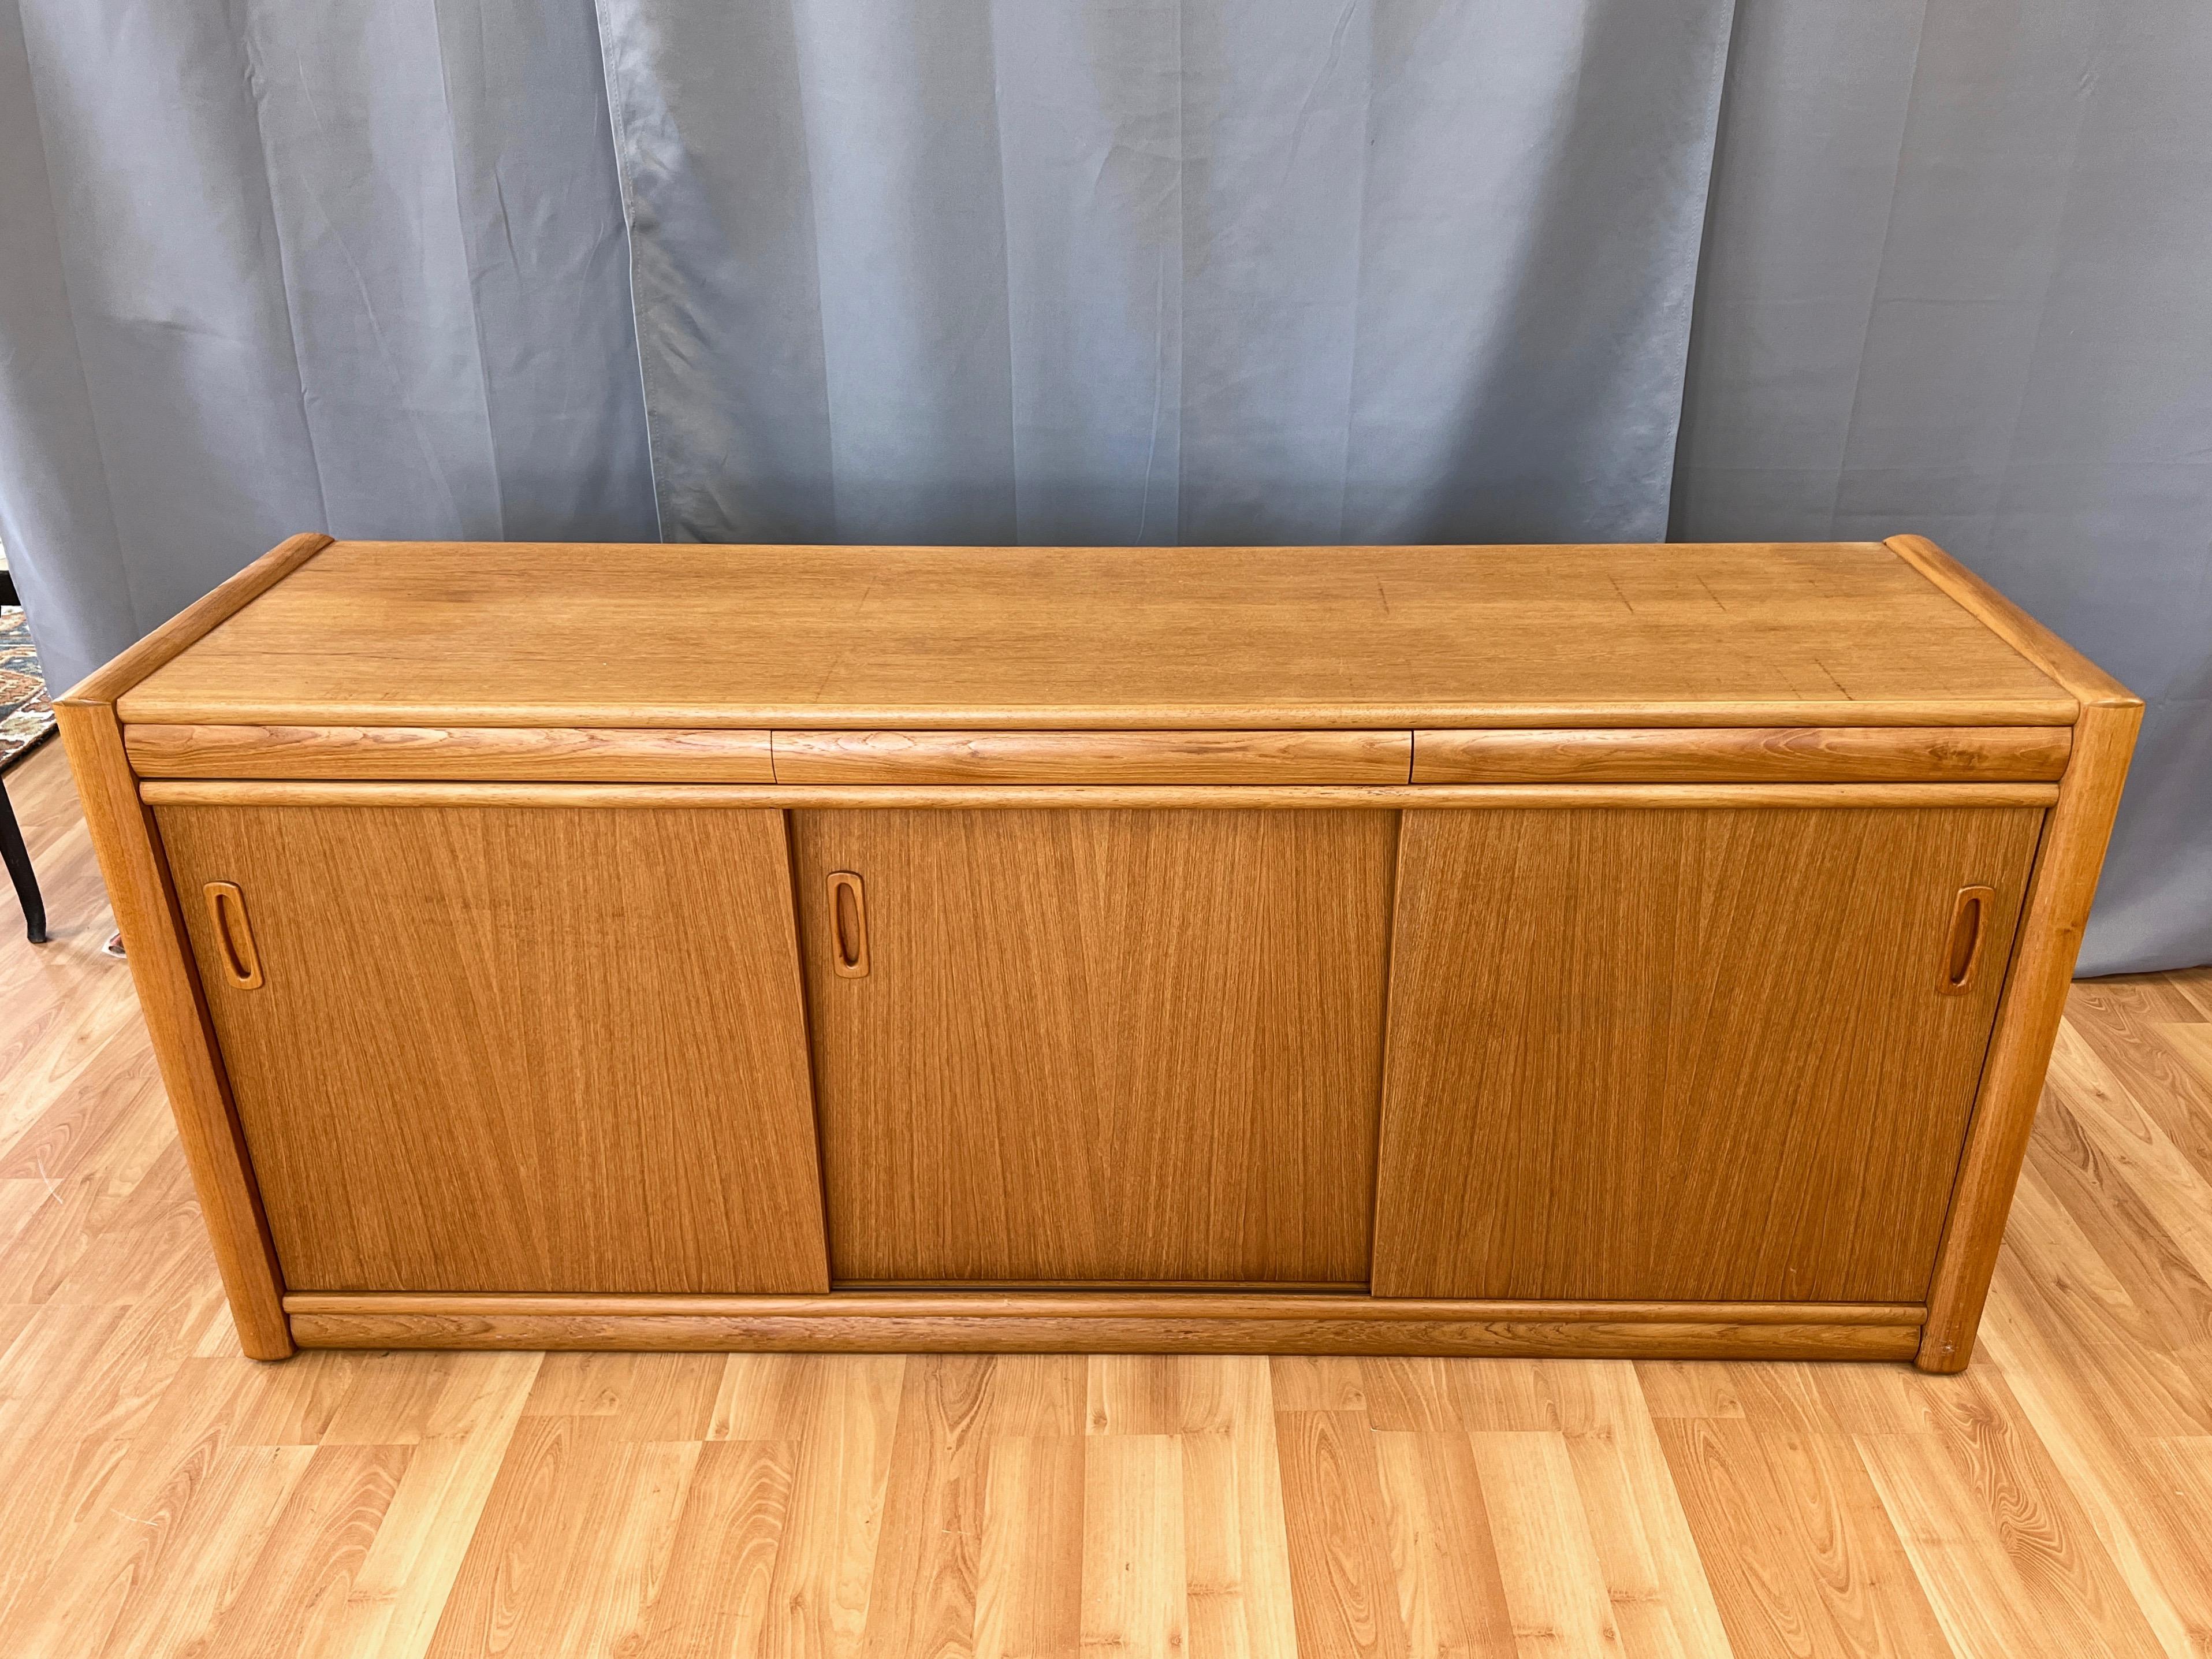 Danish Modern Long Teak Sideboard with Three Doors and Three Drawers, 1970s For Sale 2